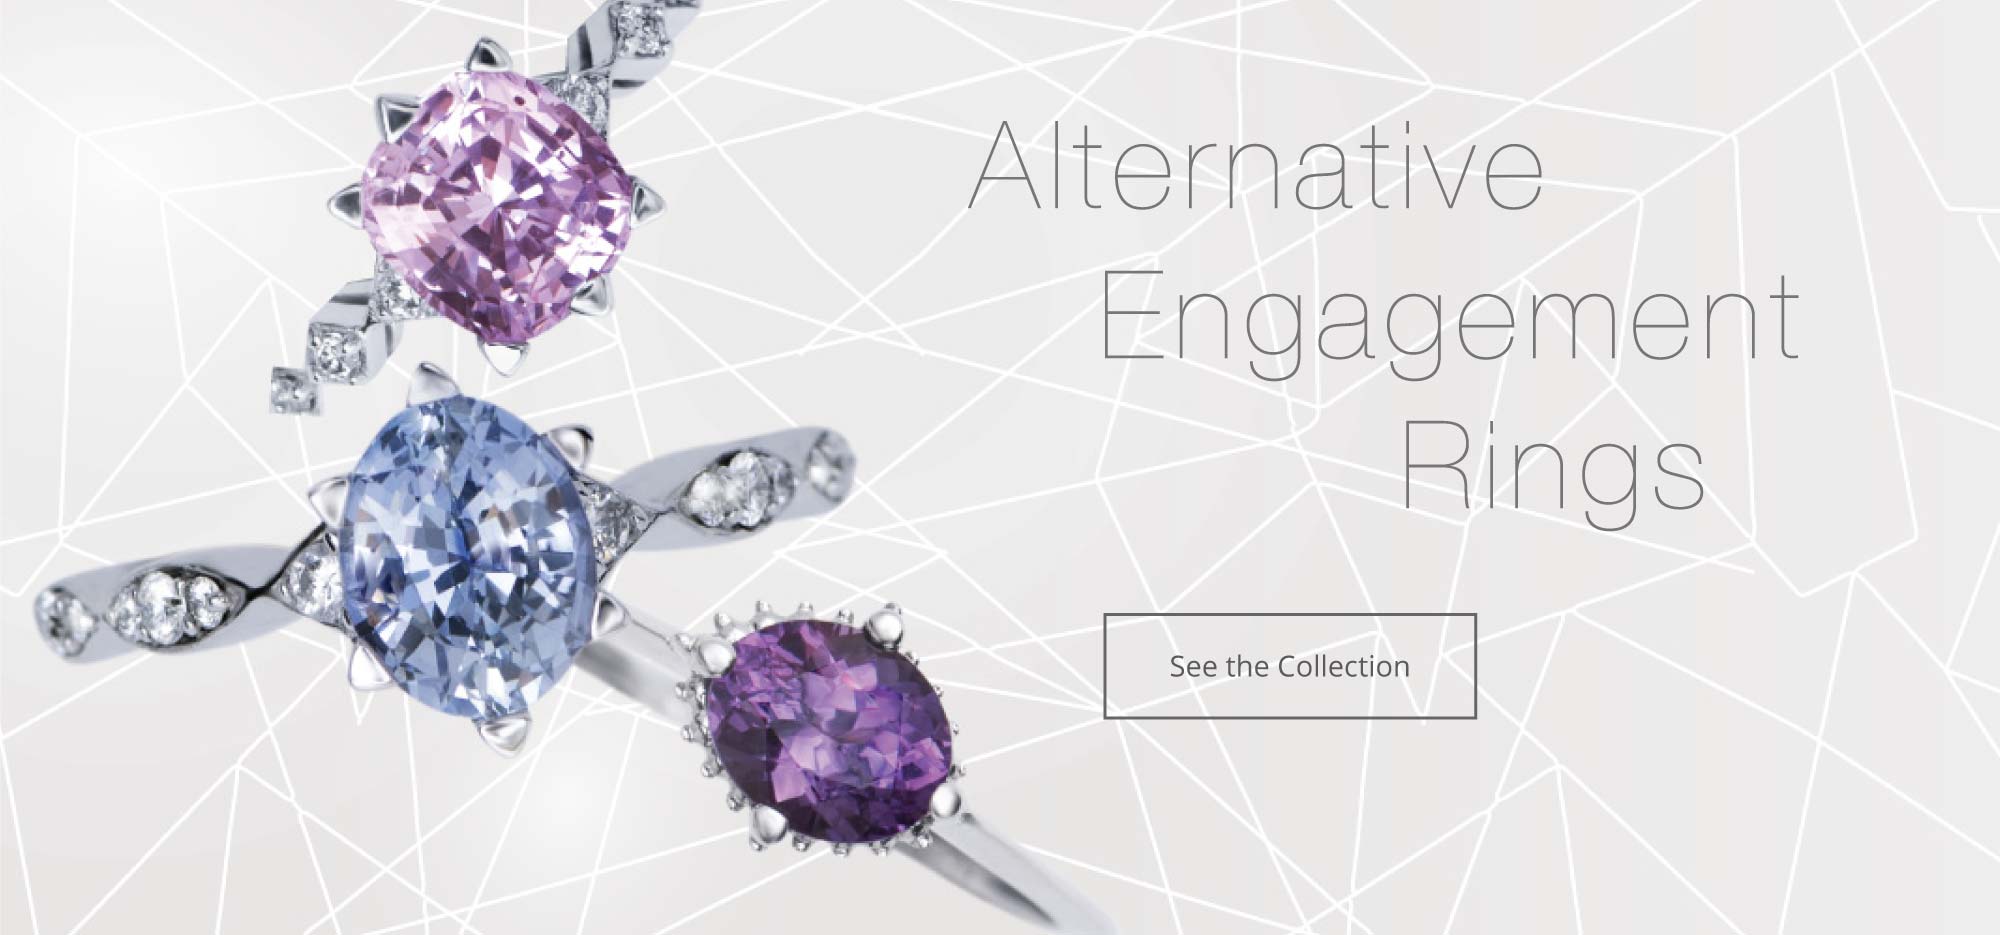 Alternative Engagement Rings: View the Collection